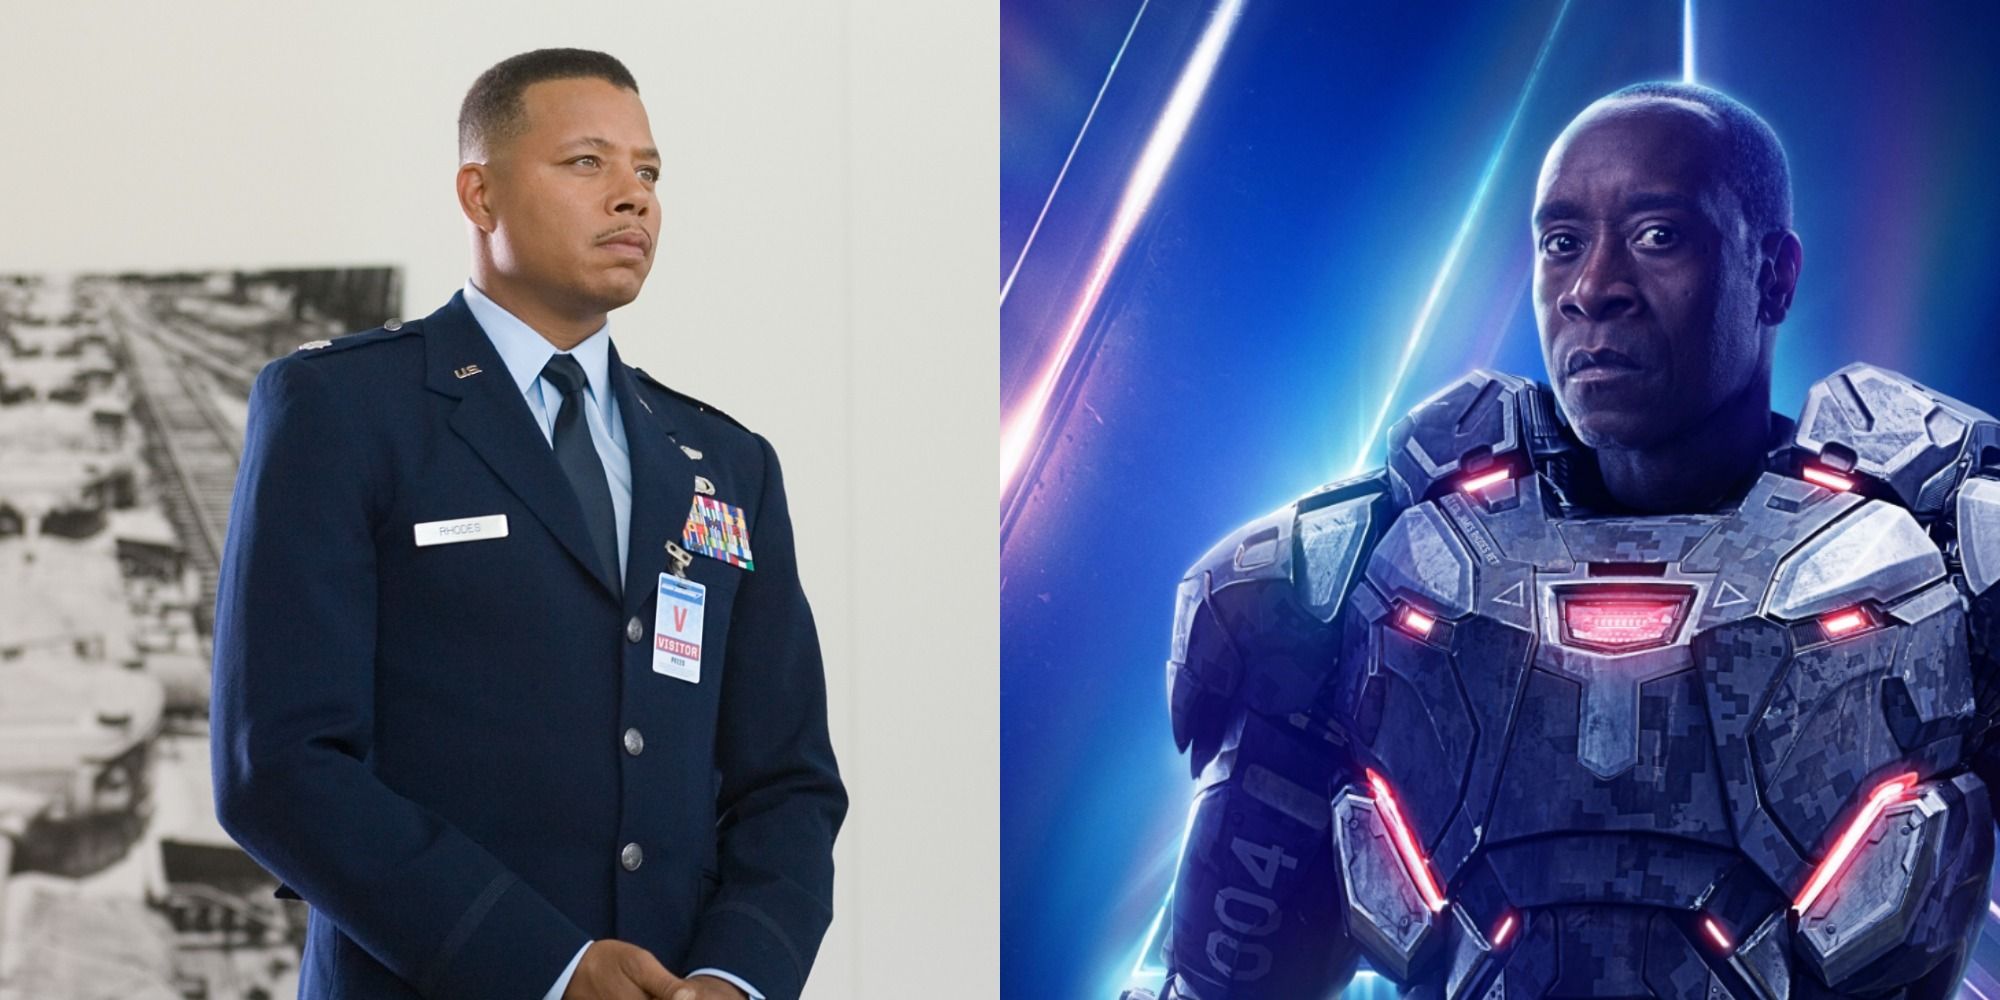 side by side images of Terrence Howard and Don Cheadle as War Machine/James Rhodes in the MCU